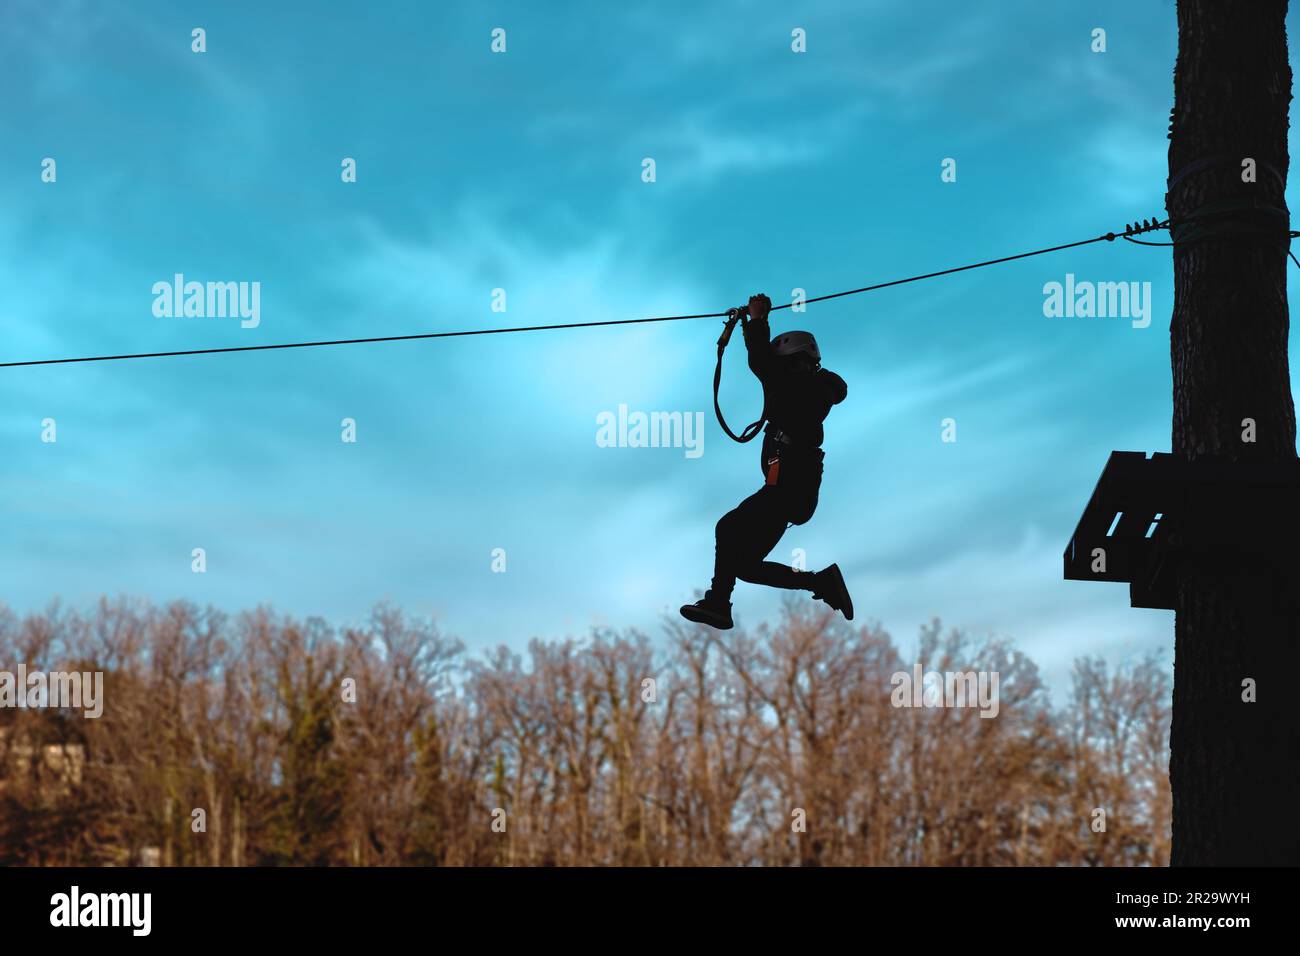 Silhouette of an unrecognizable person zip-lining at an adventure park. Wearing a safety helmet and harness, they are captured mid-air against a blue Stock Photo